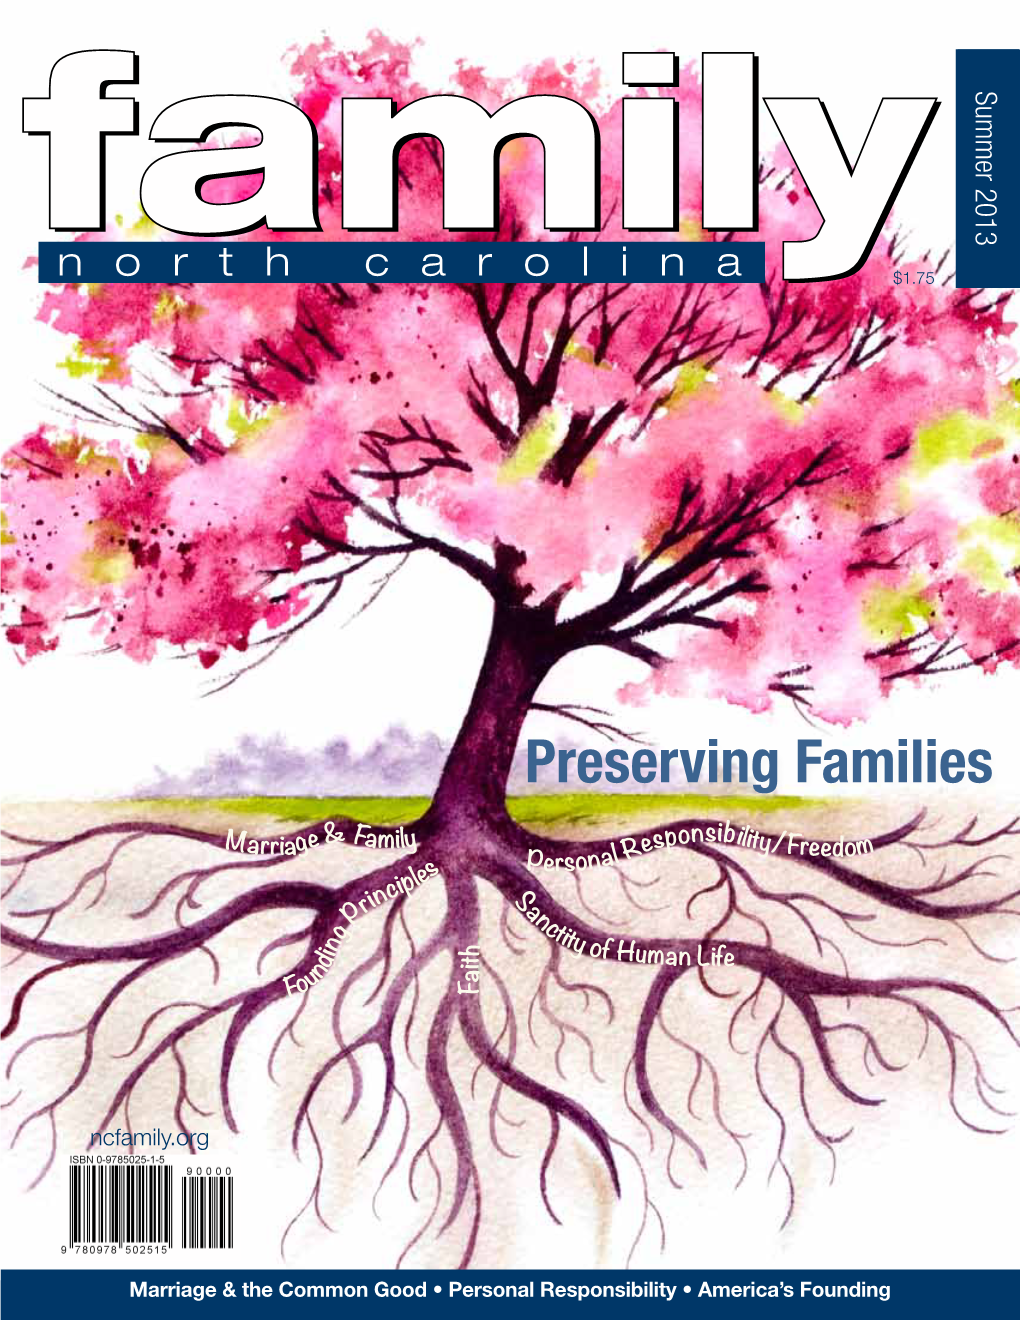 Preserving Families